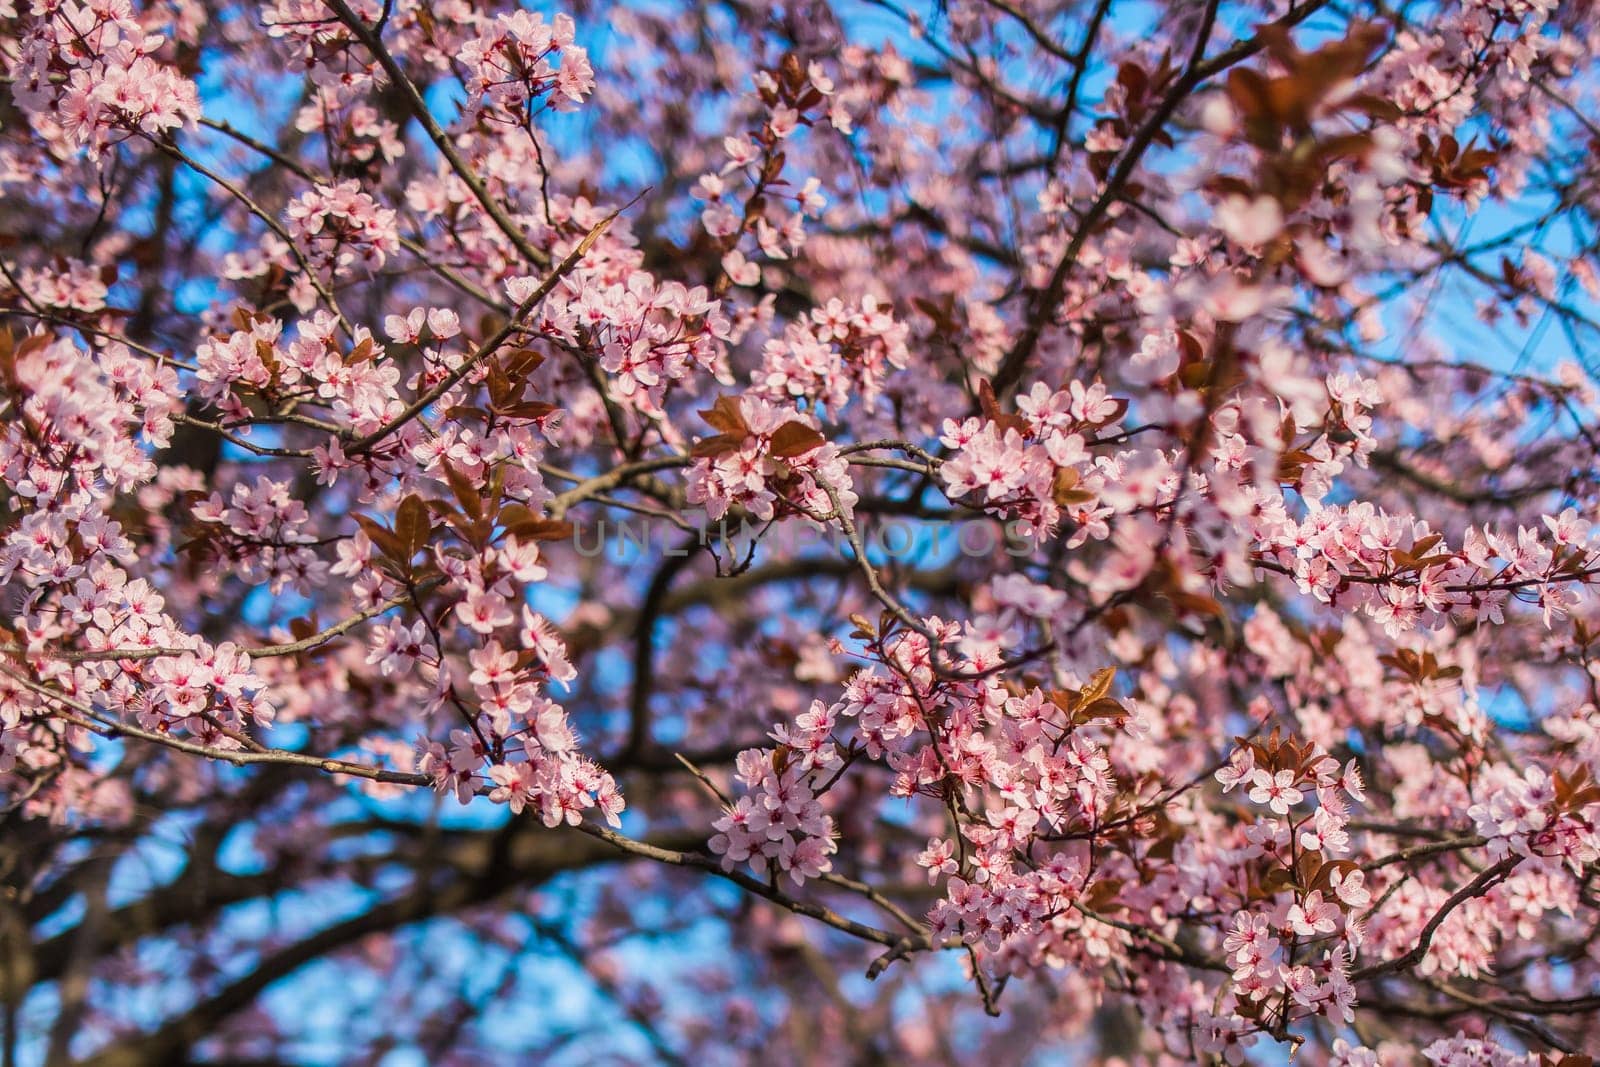 Selective focus of beautiful branches of pink Cherry blossom on the tree under blue sky, Beautiful Sakura flowers during spring season in the park, Nature floral background with copy space. Blooming and blossom.